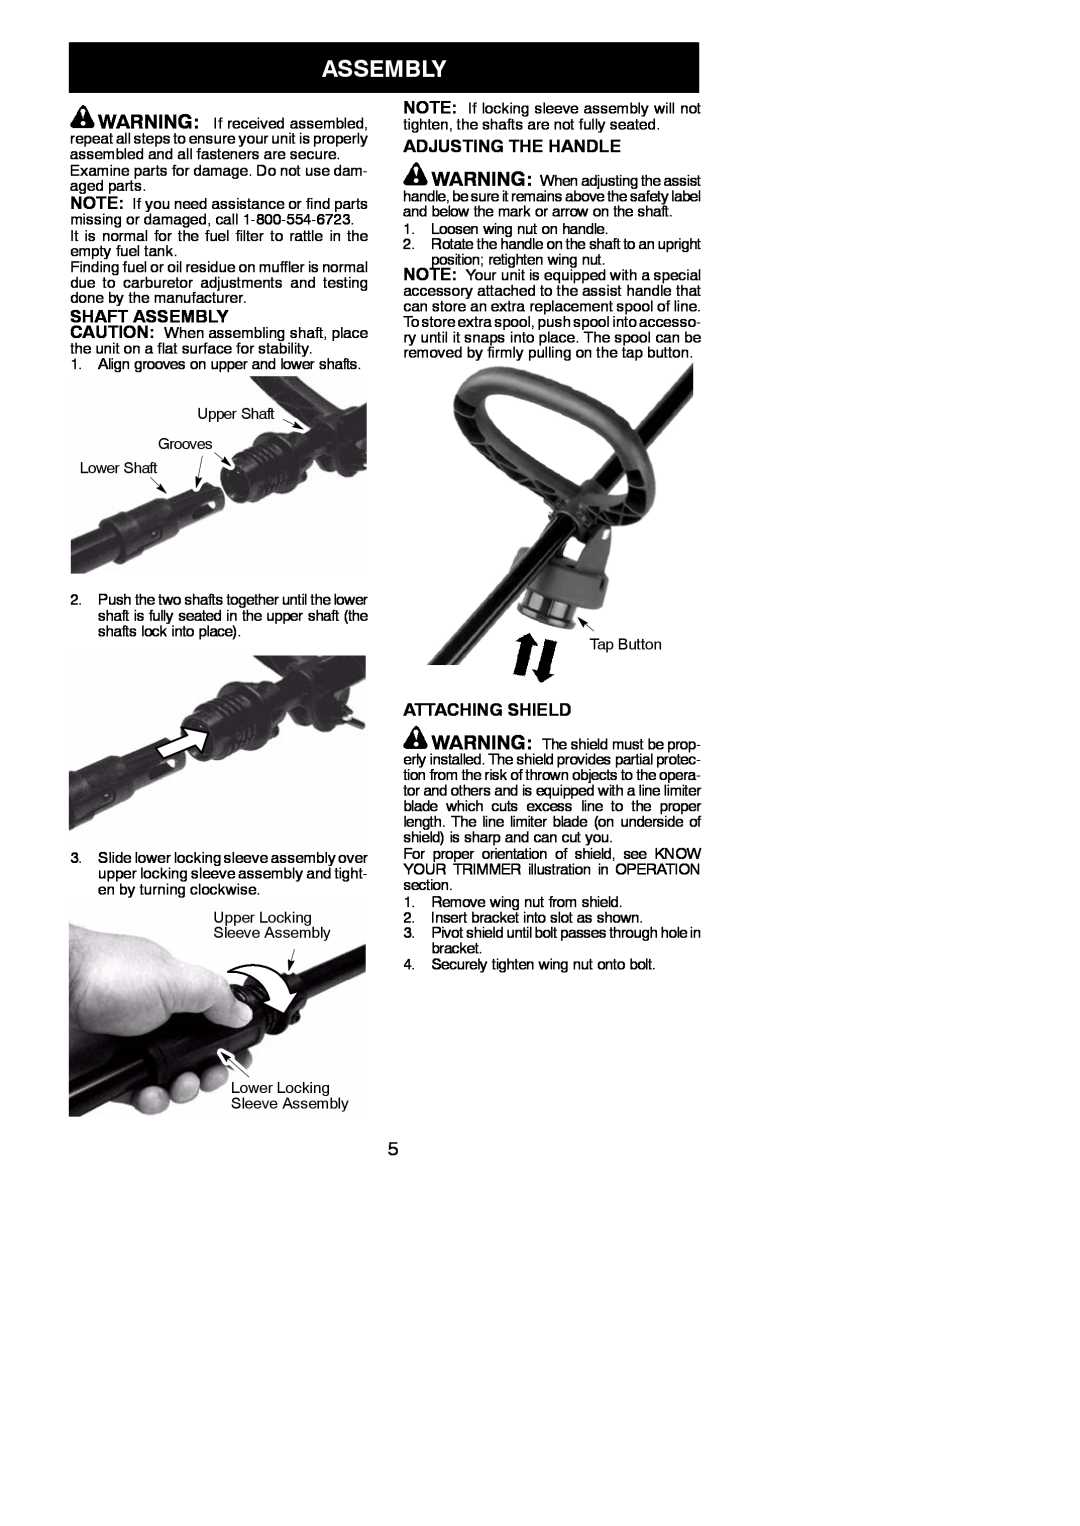 Weed Eater FX26SC, 545186796 instruction manual Shaft Assembly, Adjusting The Handle, Attaching Shield 